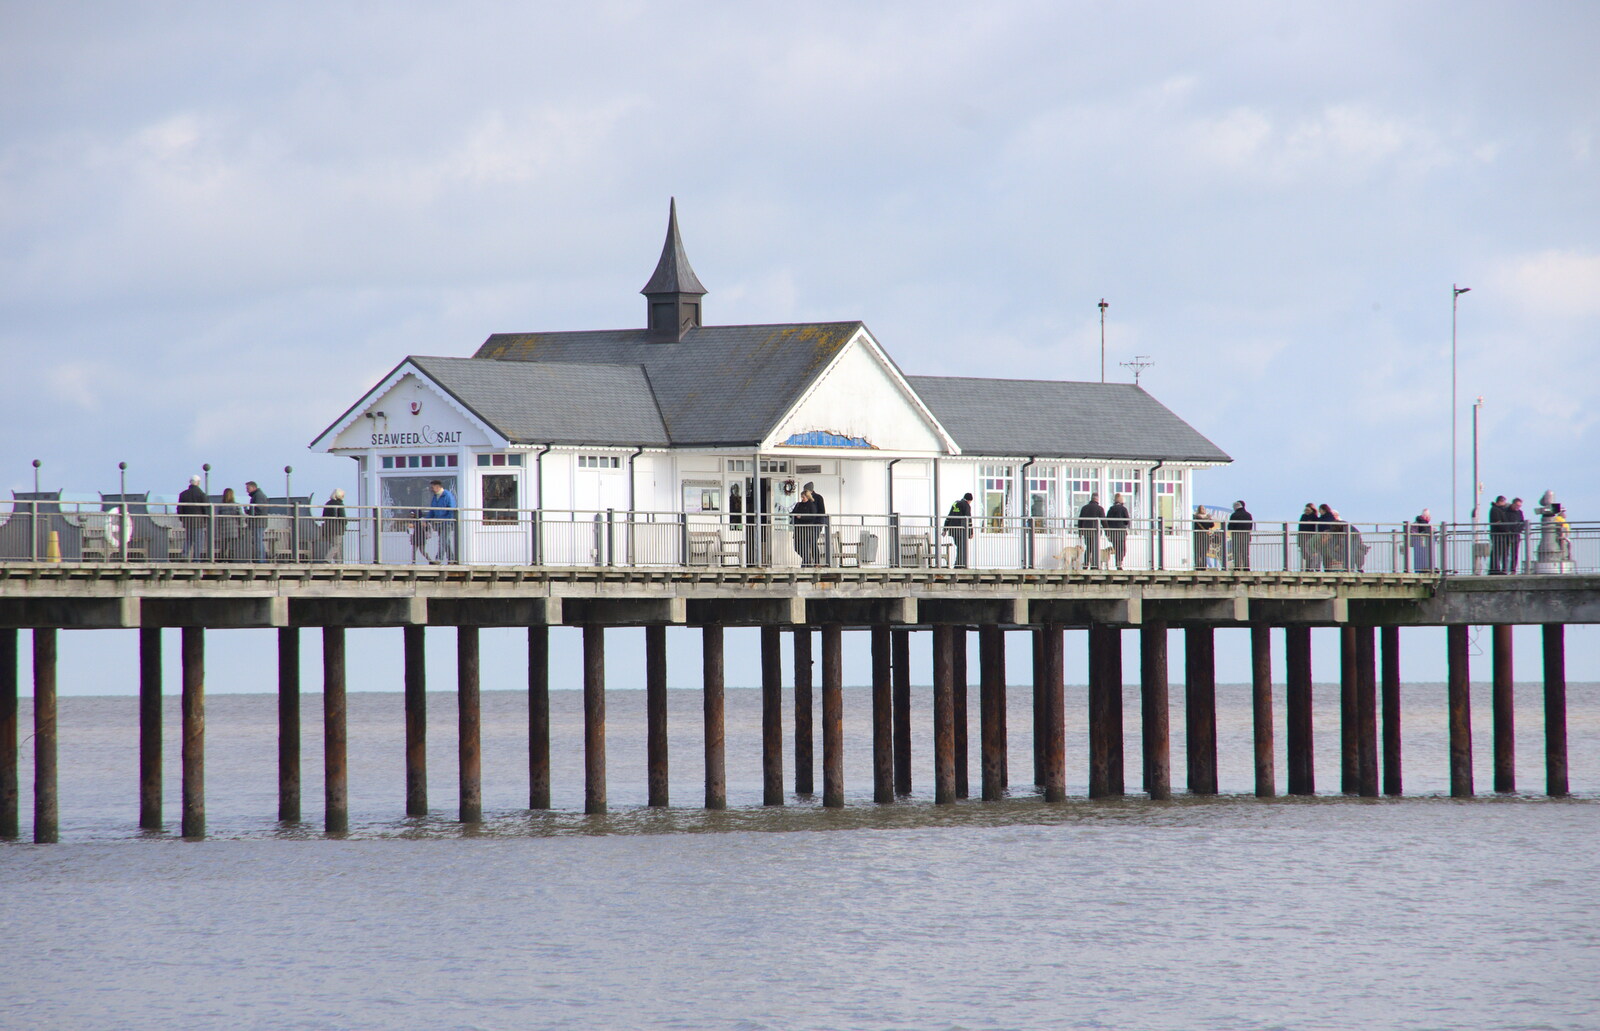 Southwold Pier from A Trip to the Amusements, Southwold Pier, Southwold, Suffolk - 5th November 2017